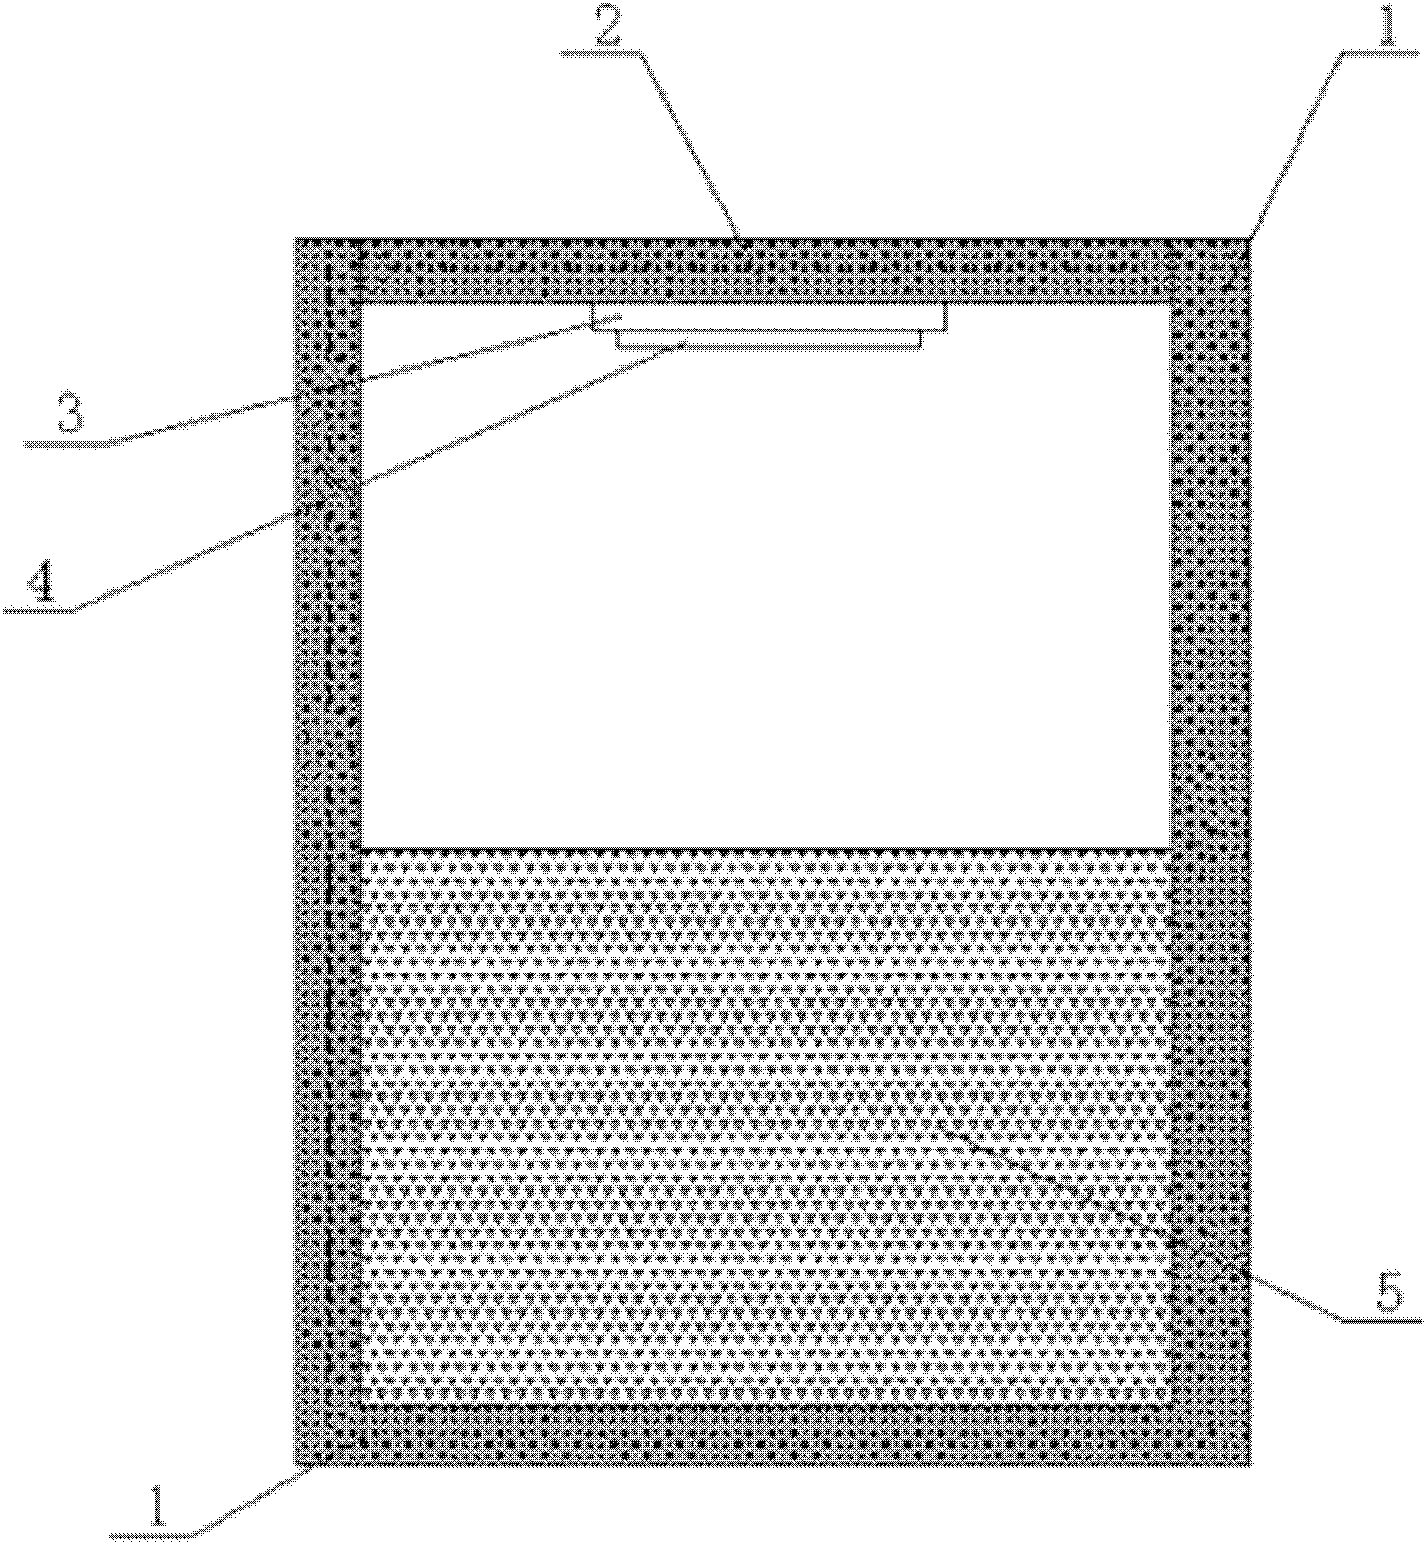 Graphite crucible for growing large-size silicon carbide single crystal by physical vapor deposition method and application thereof